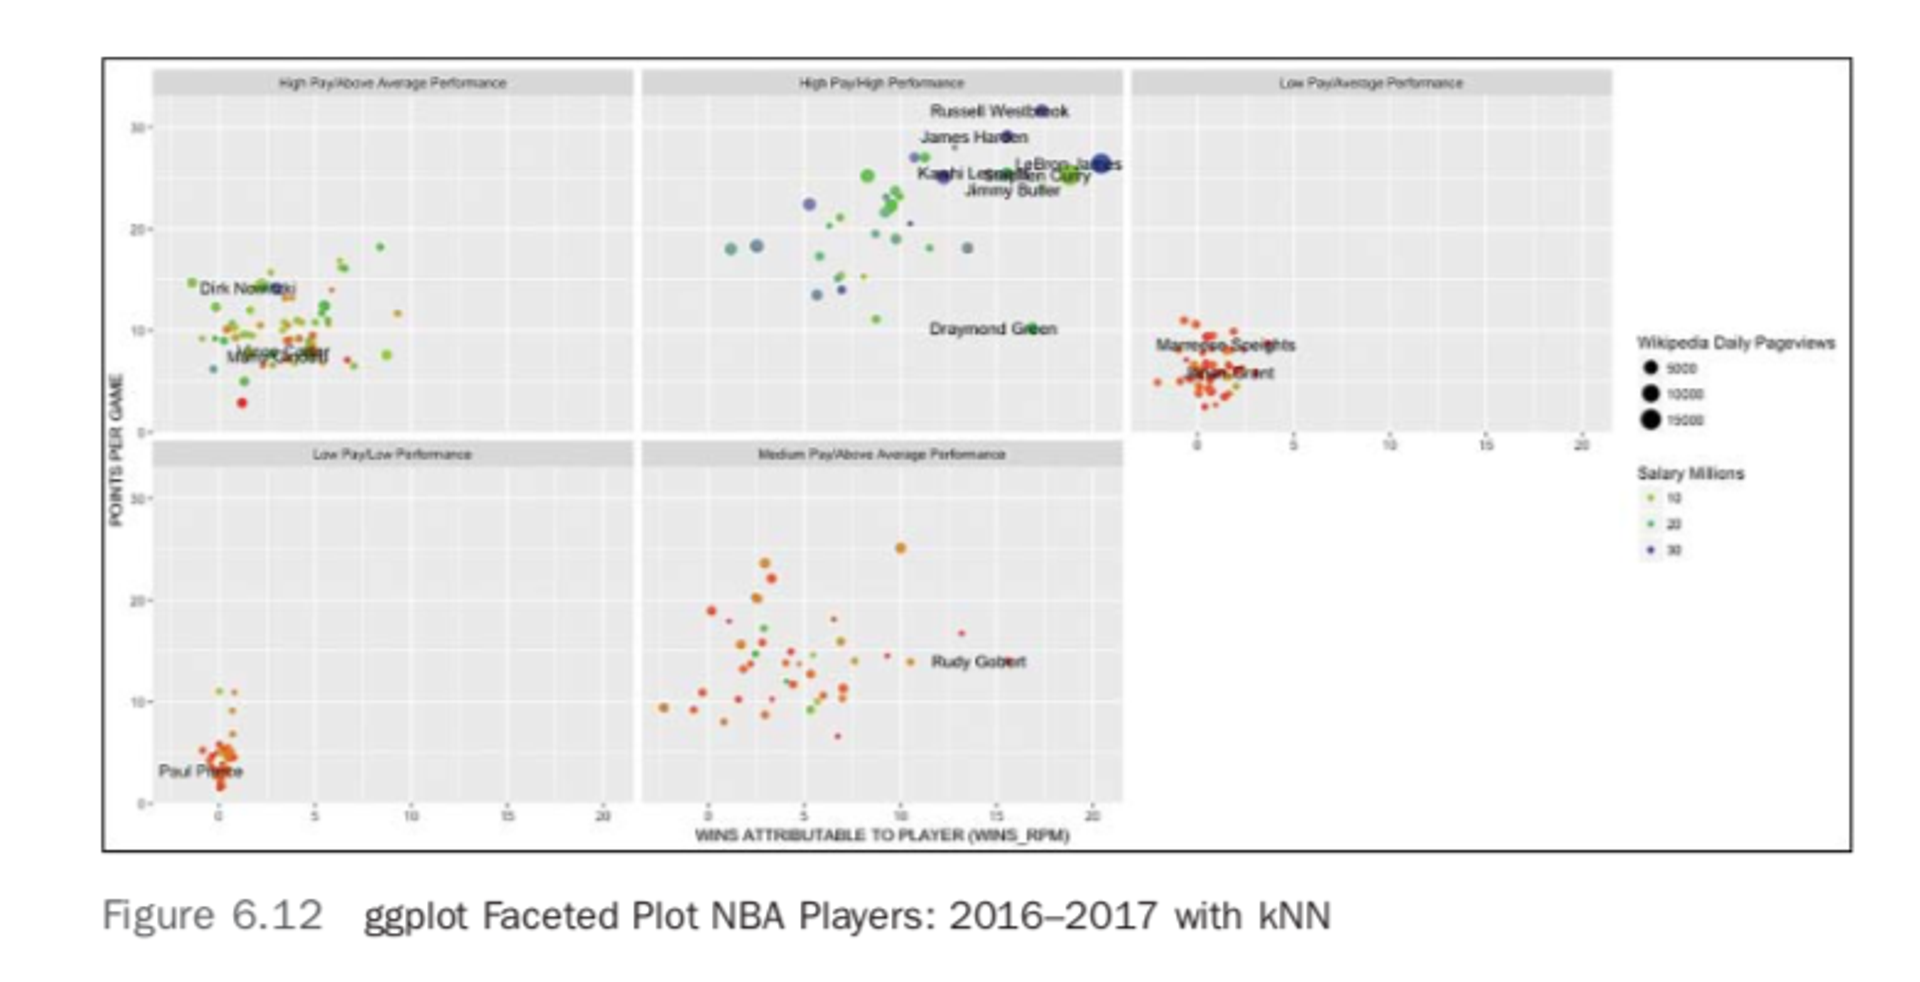 ggplot Faceted Plot NBA Players: 2016 - 2017 with kNN